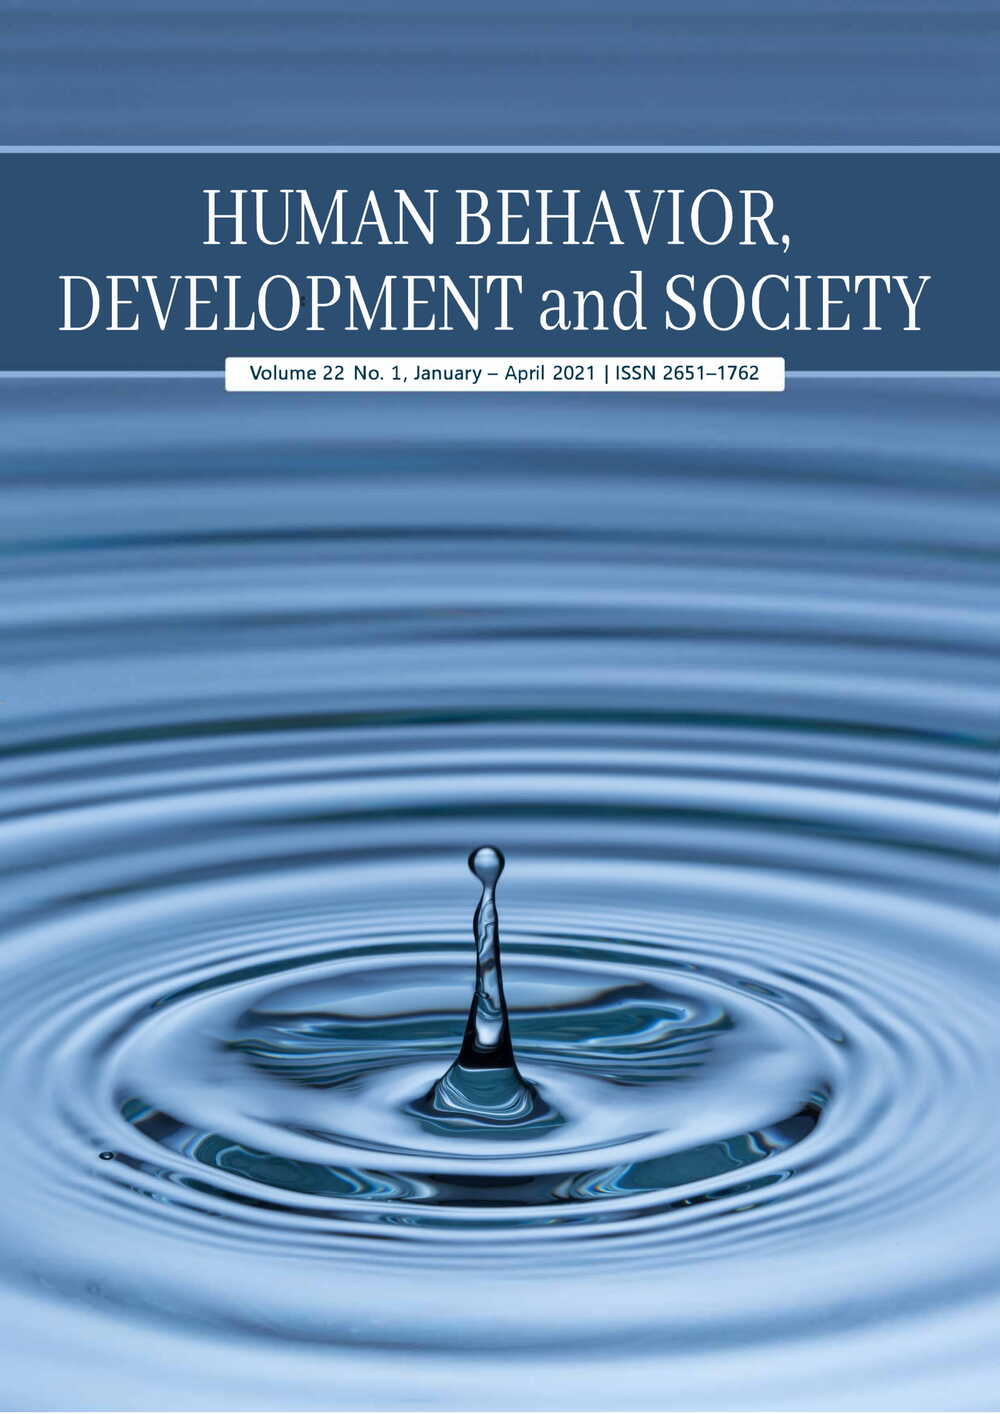 University Students' Perceptions of Korean Wave and Its Impact on Their  Views of Korea and Korean Culture | HUMAN BEHAVIOR, DEVELOPMENT and SOCIETY